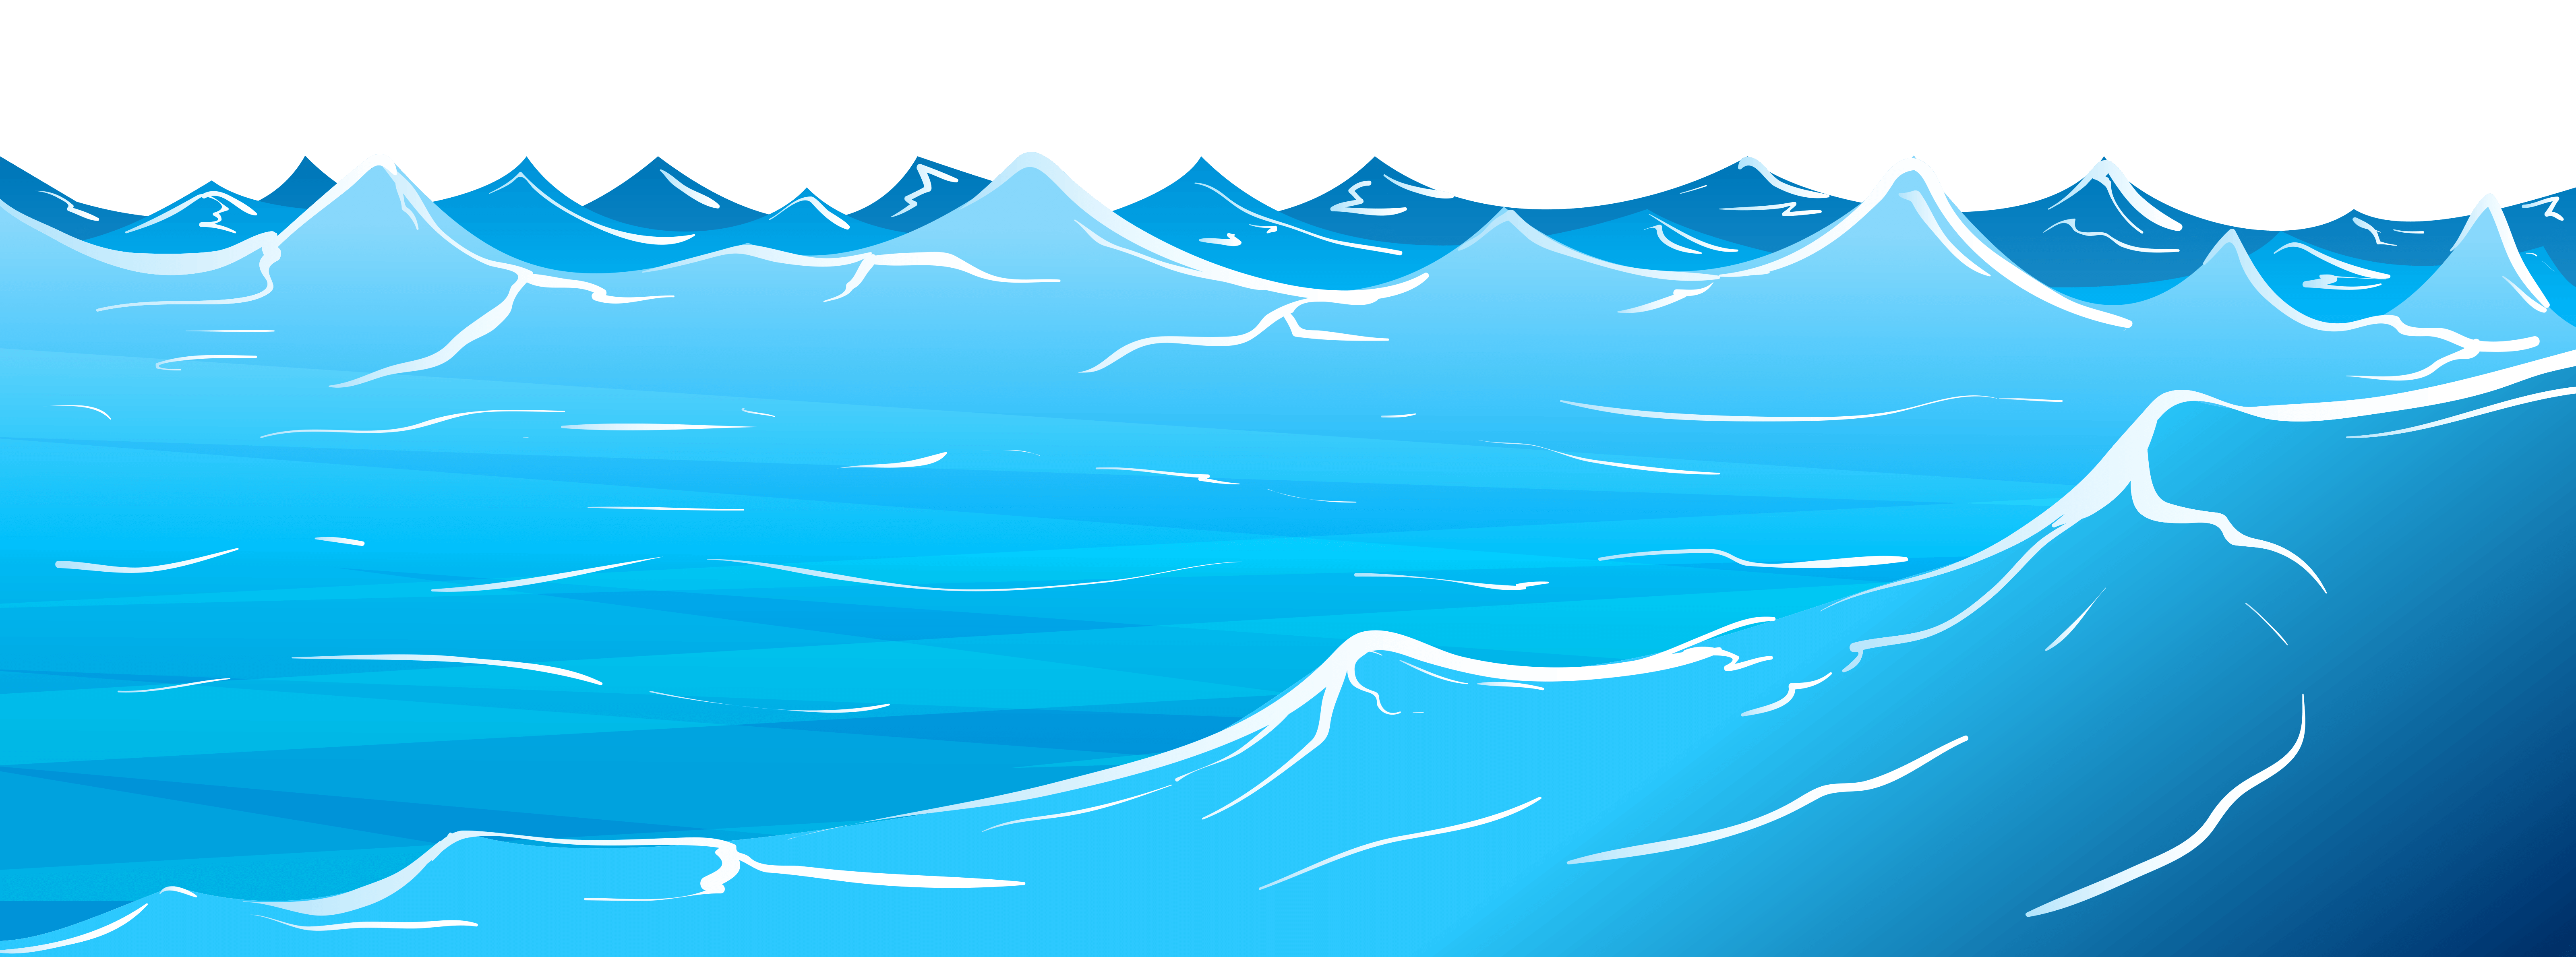 Water Clipart Transparent Background.